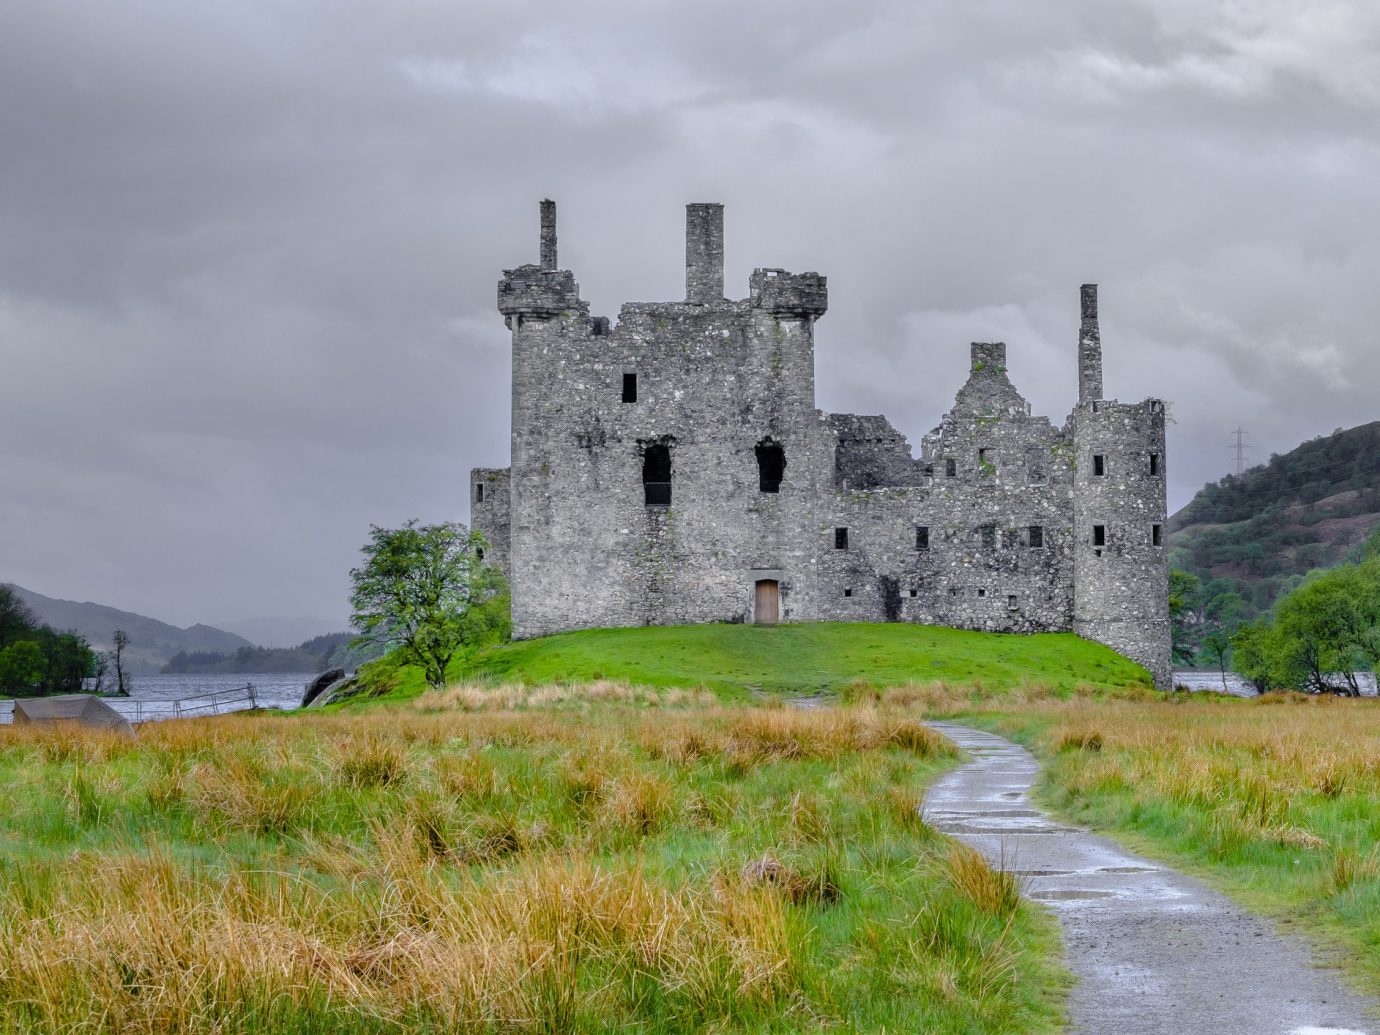 Landmarks Offbeat grass sky outdoor building castle green cloud highland Ruins fortification château tree medieval architecture grassy historic site history stone bastion